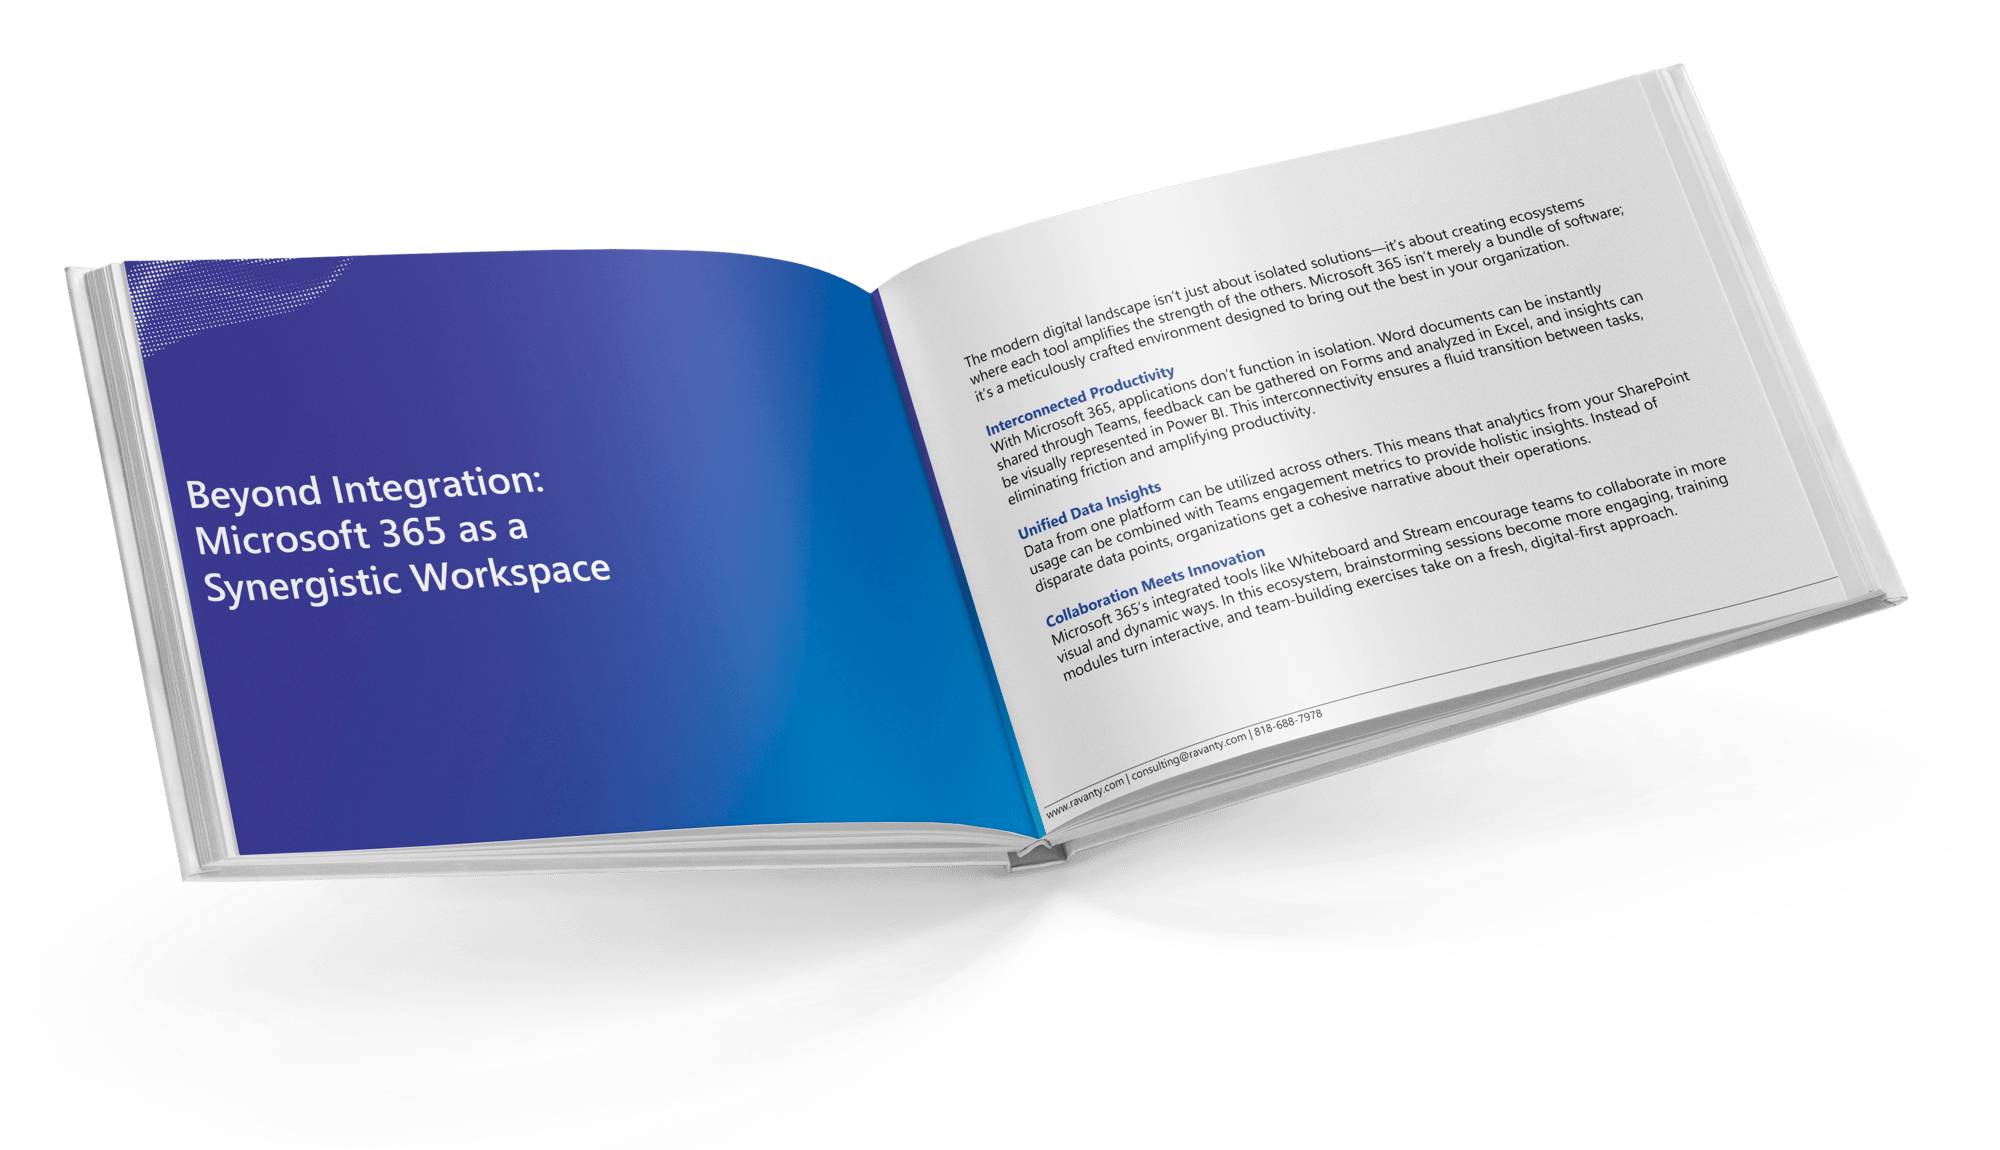 Achieving Excellence with Microsoft 365 - booklet-1